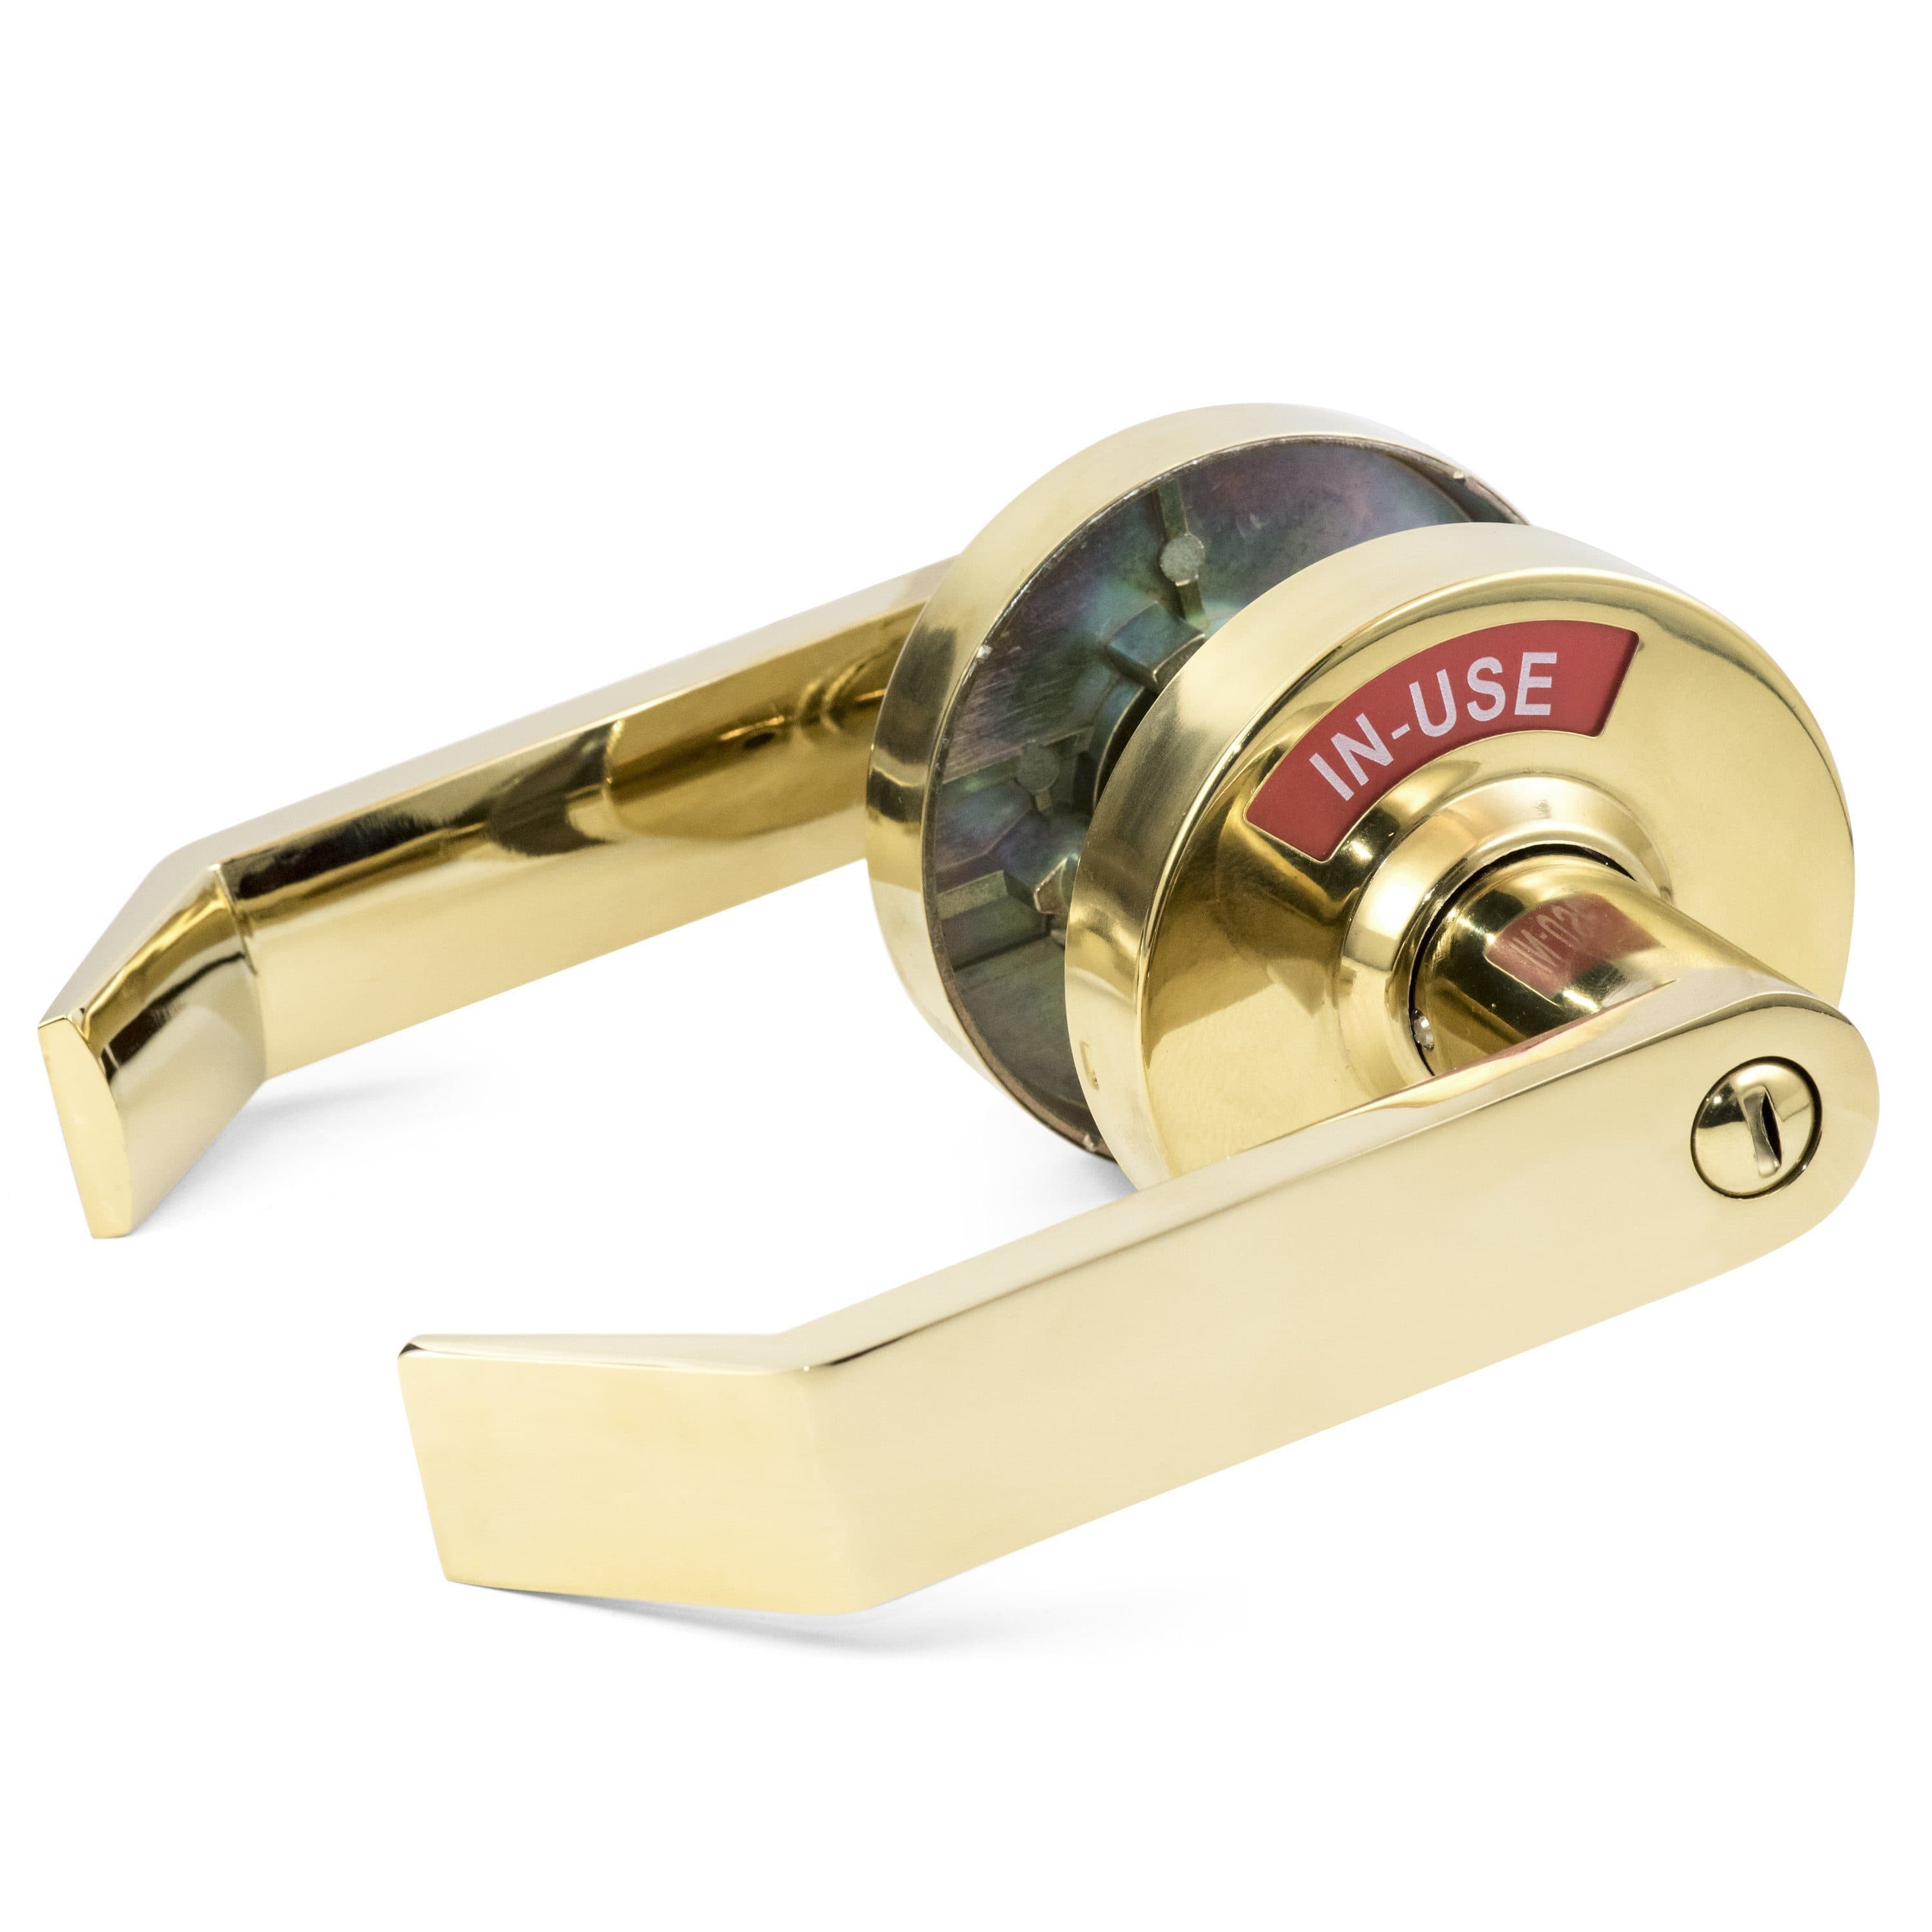 PVD Brass Door Handle with Privacy Indicator Left-Handed